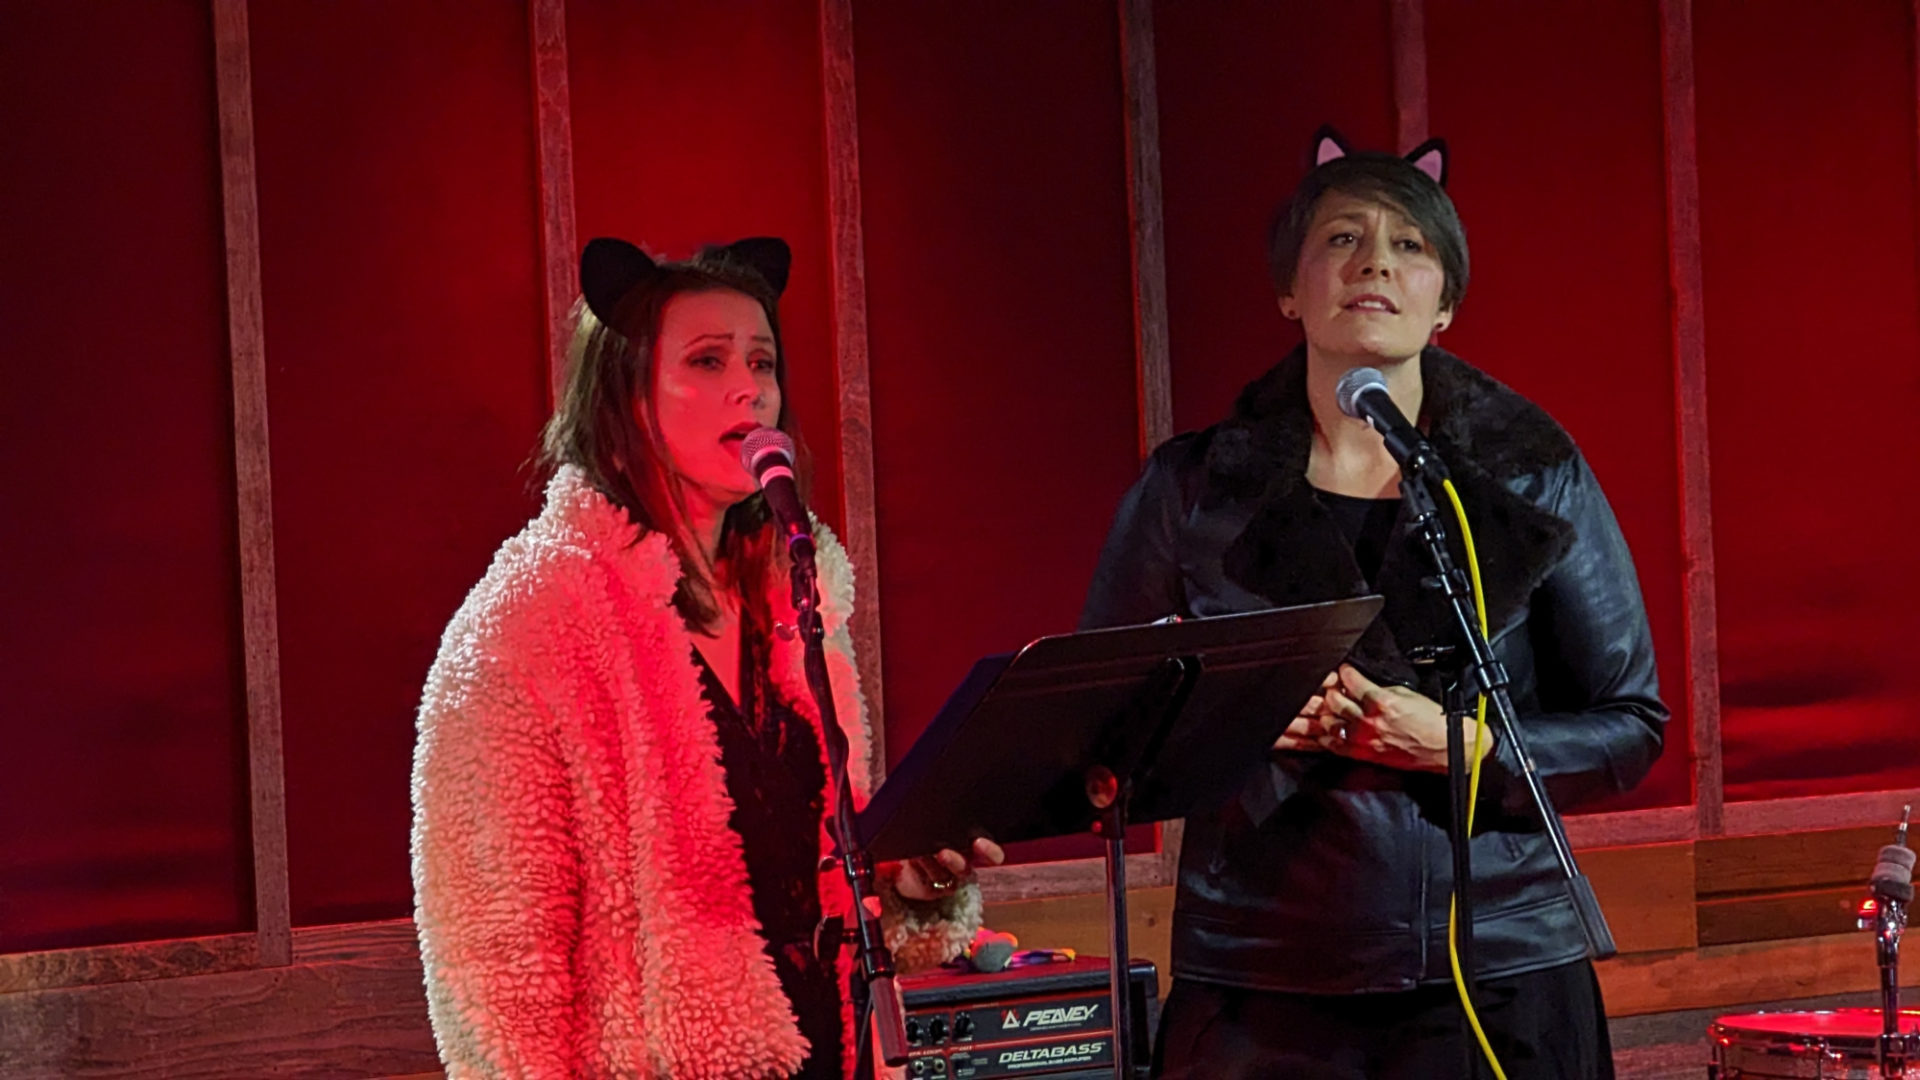 Two white women, one i a white coat, one in a black coat, are on a stage singing behind a microphone. They are both wearing cat ear headbands. The lighting is casting a red glow on them.